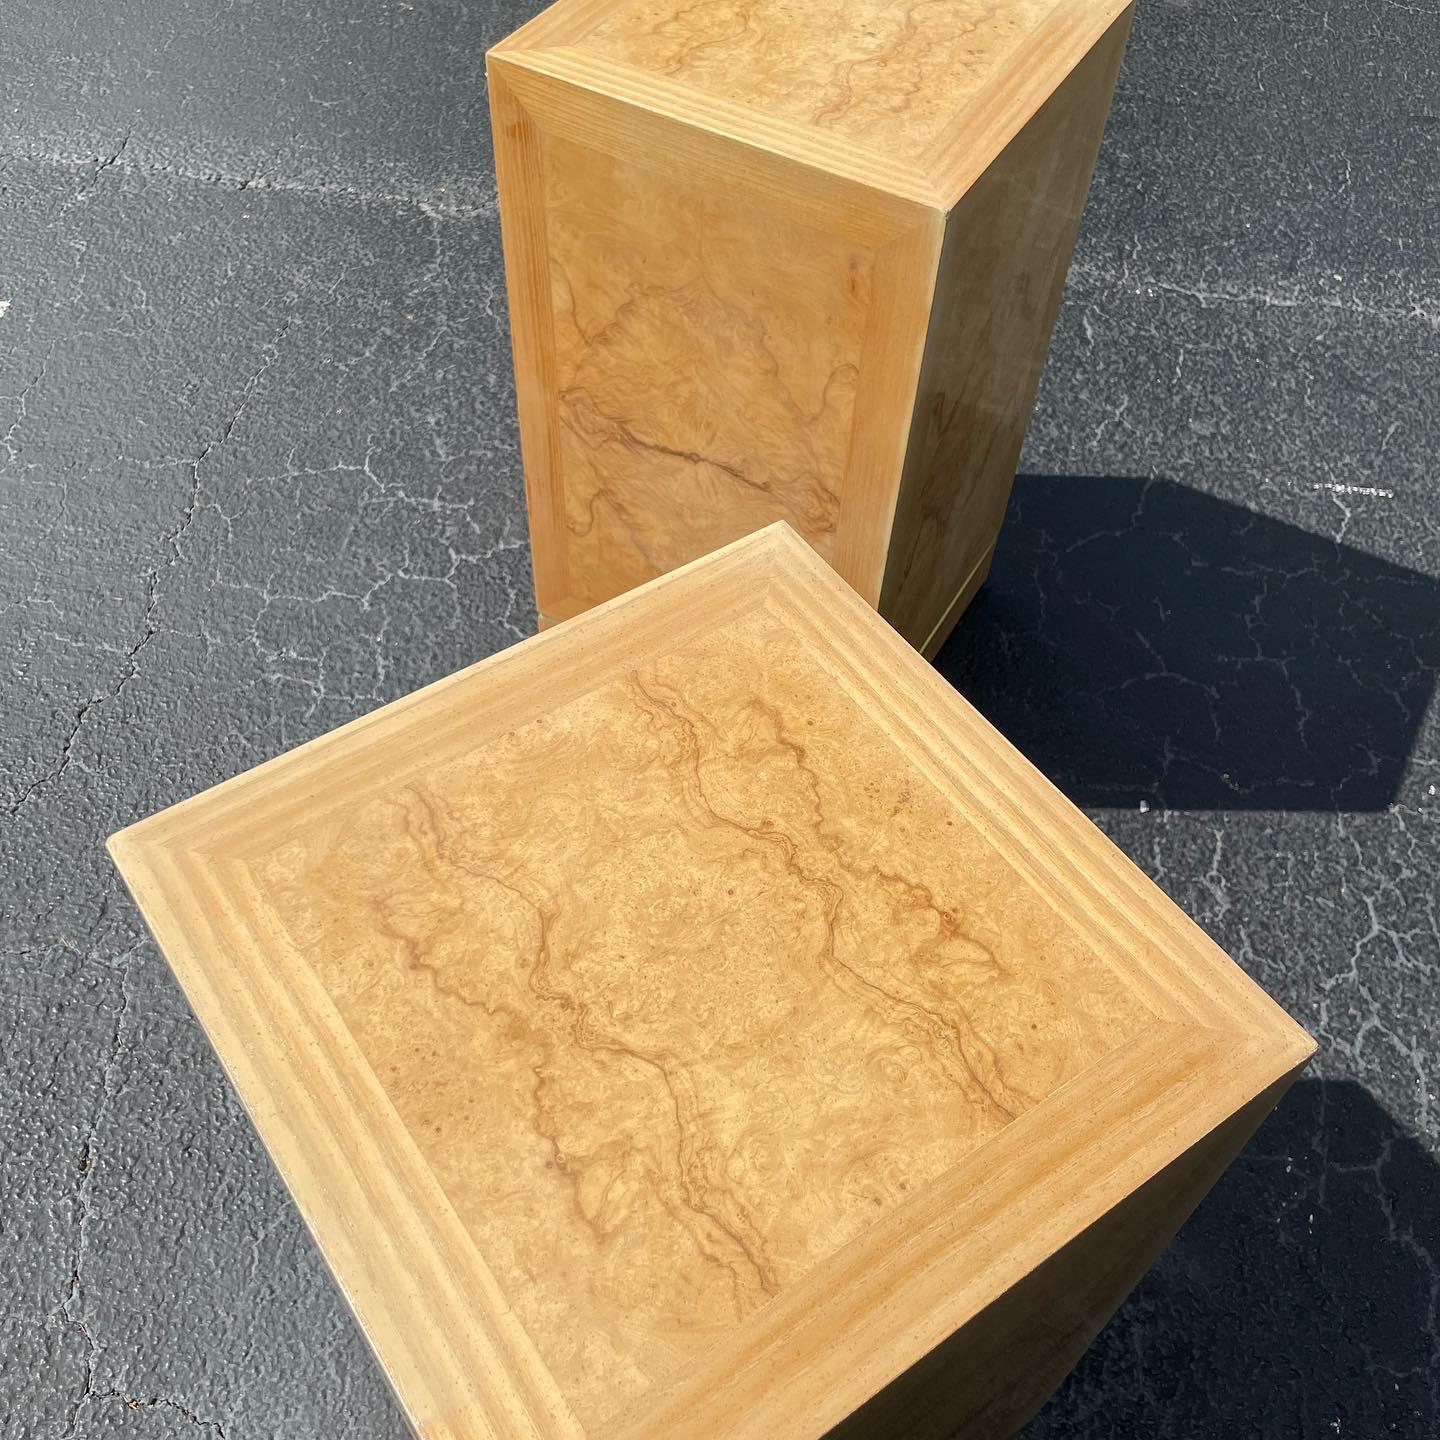 Pair of Vintage Drexel Heritage burl wood and brass pedestal table bases
This duo is comprised of real burl wood inlay throughout. They can be combined as a dining table base or used separately as pedestals. 

in great vintage condition with